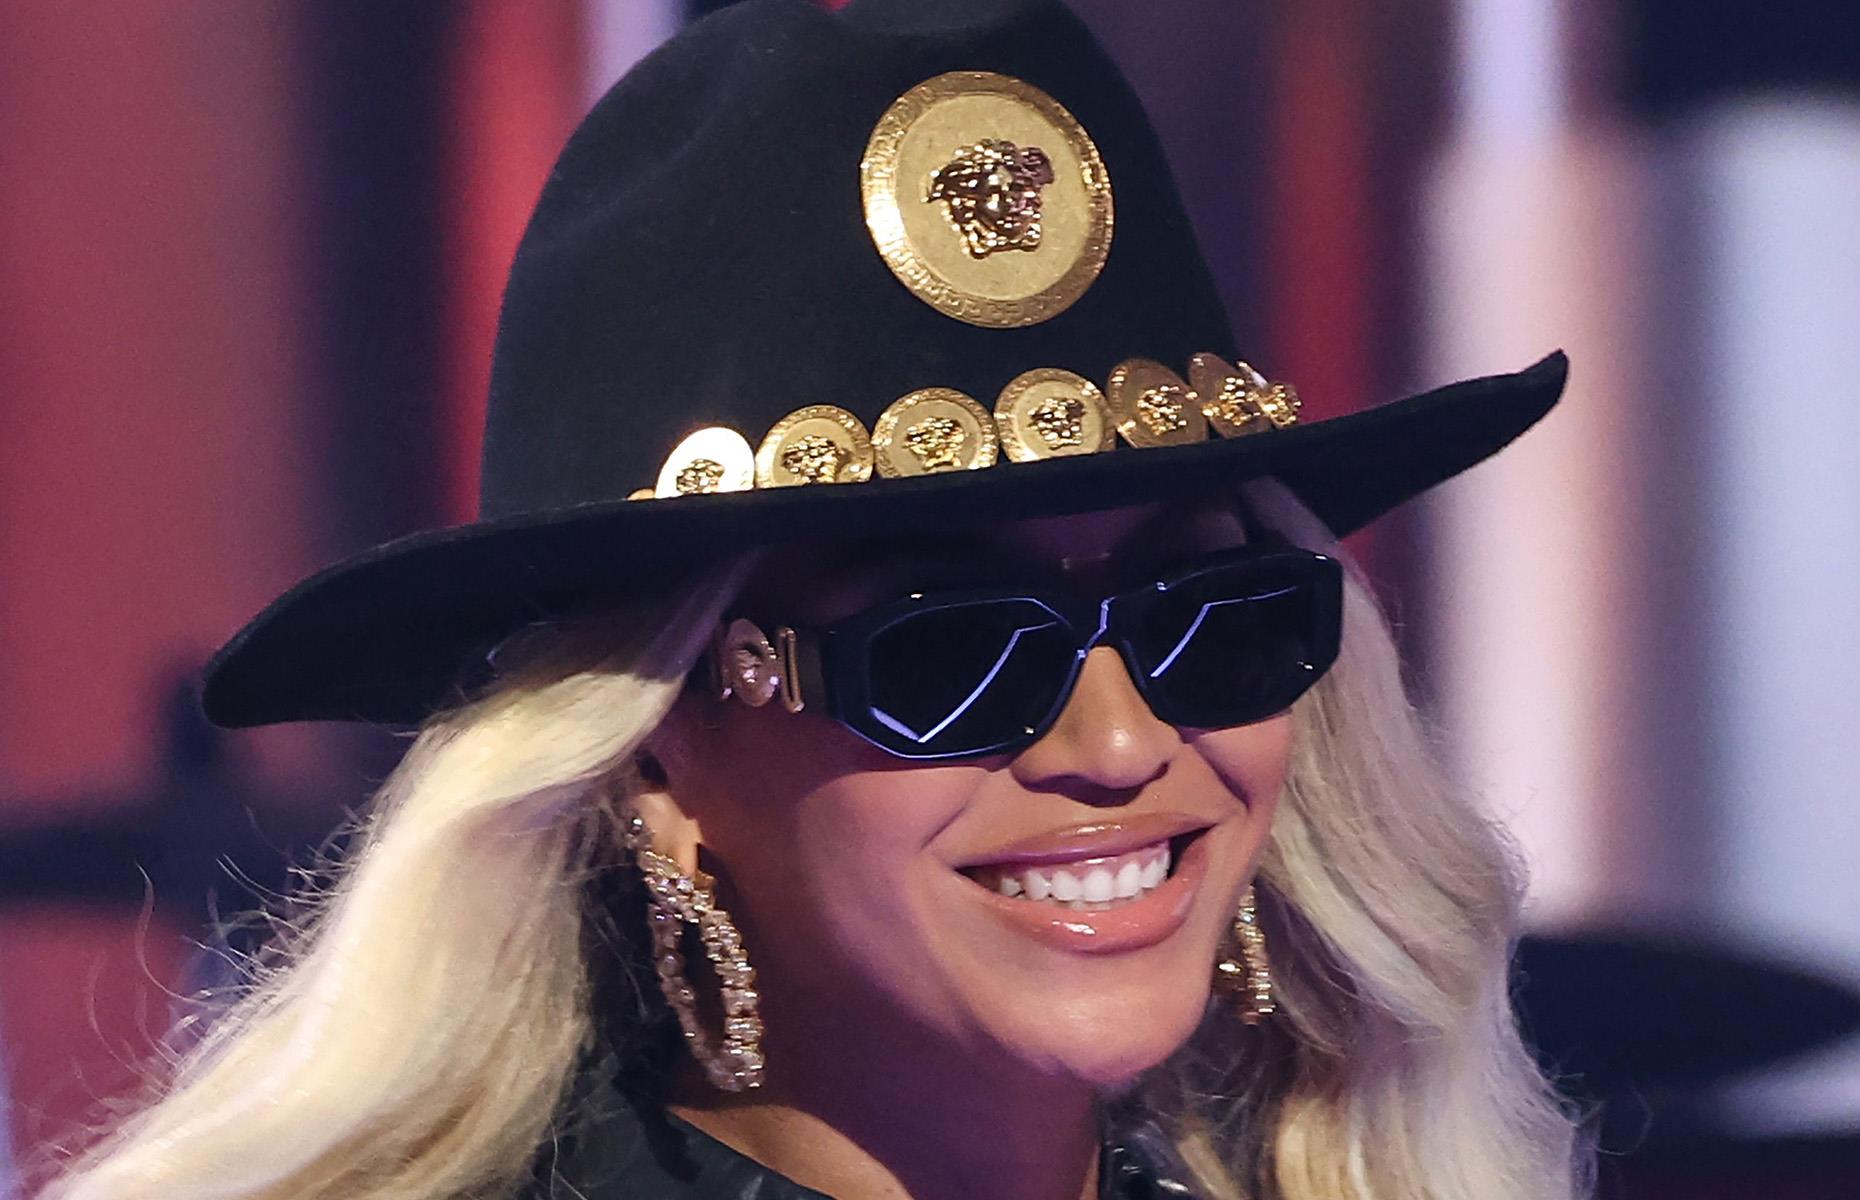 <p>To cap it all off, Beyoncé was just honored with the Innovator Award at the iHeartRadio Music Awards (pictured).</p>  <p>Music icon Stevie Wonder presented Queen Bey with the award, stating, "Now Beyoncé is once again changing music and culture, climbing in the saddle as a bona fide country music sensation with her latest masterpiece, <em>Cowboy Carter</em>, which may end up being the most talked-about album this century."</p>  <p>Meanwhile, during her acceptance speech, Beyoncé said, "Being an innovator often means being criticized, which often will test your mental strength. My hope is that we're more open to the joy and liberation that come from enjoying art with no preconceived notions."</p>